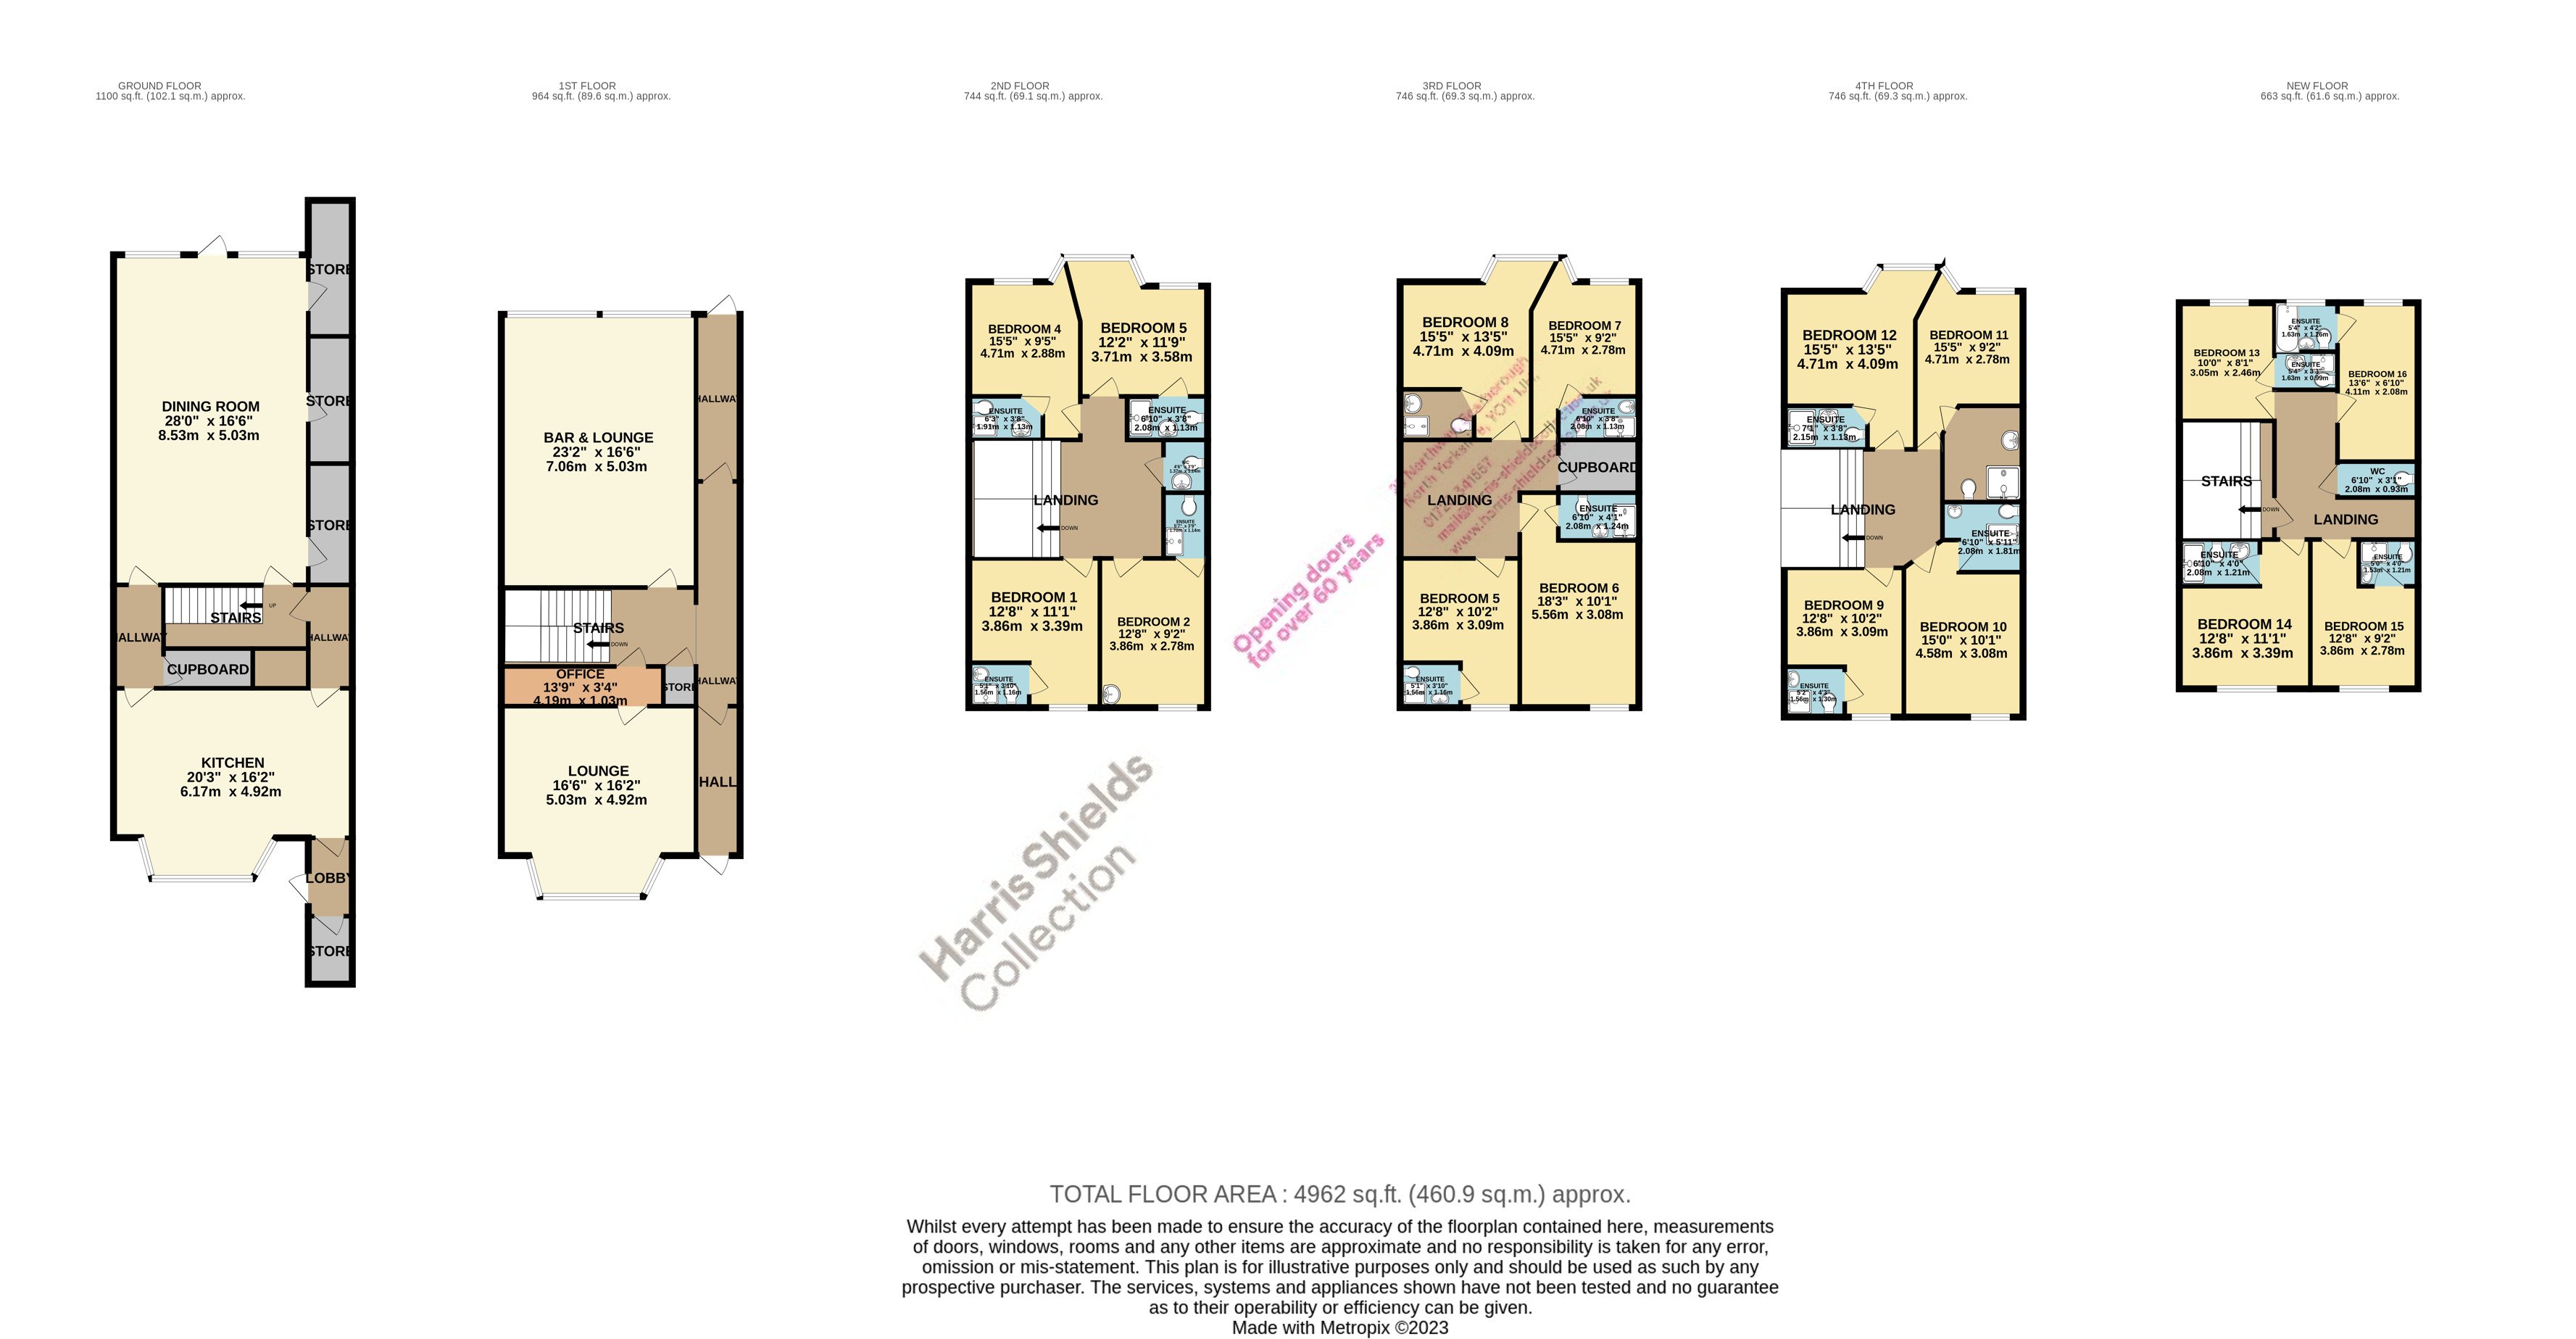 16 bed  for sale in North Marine Road, Scarborough - Property floorplan